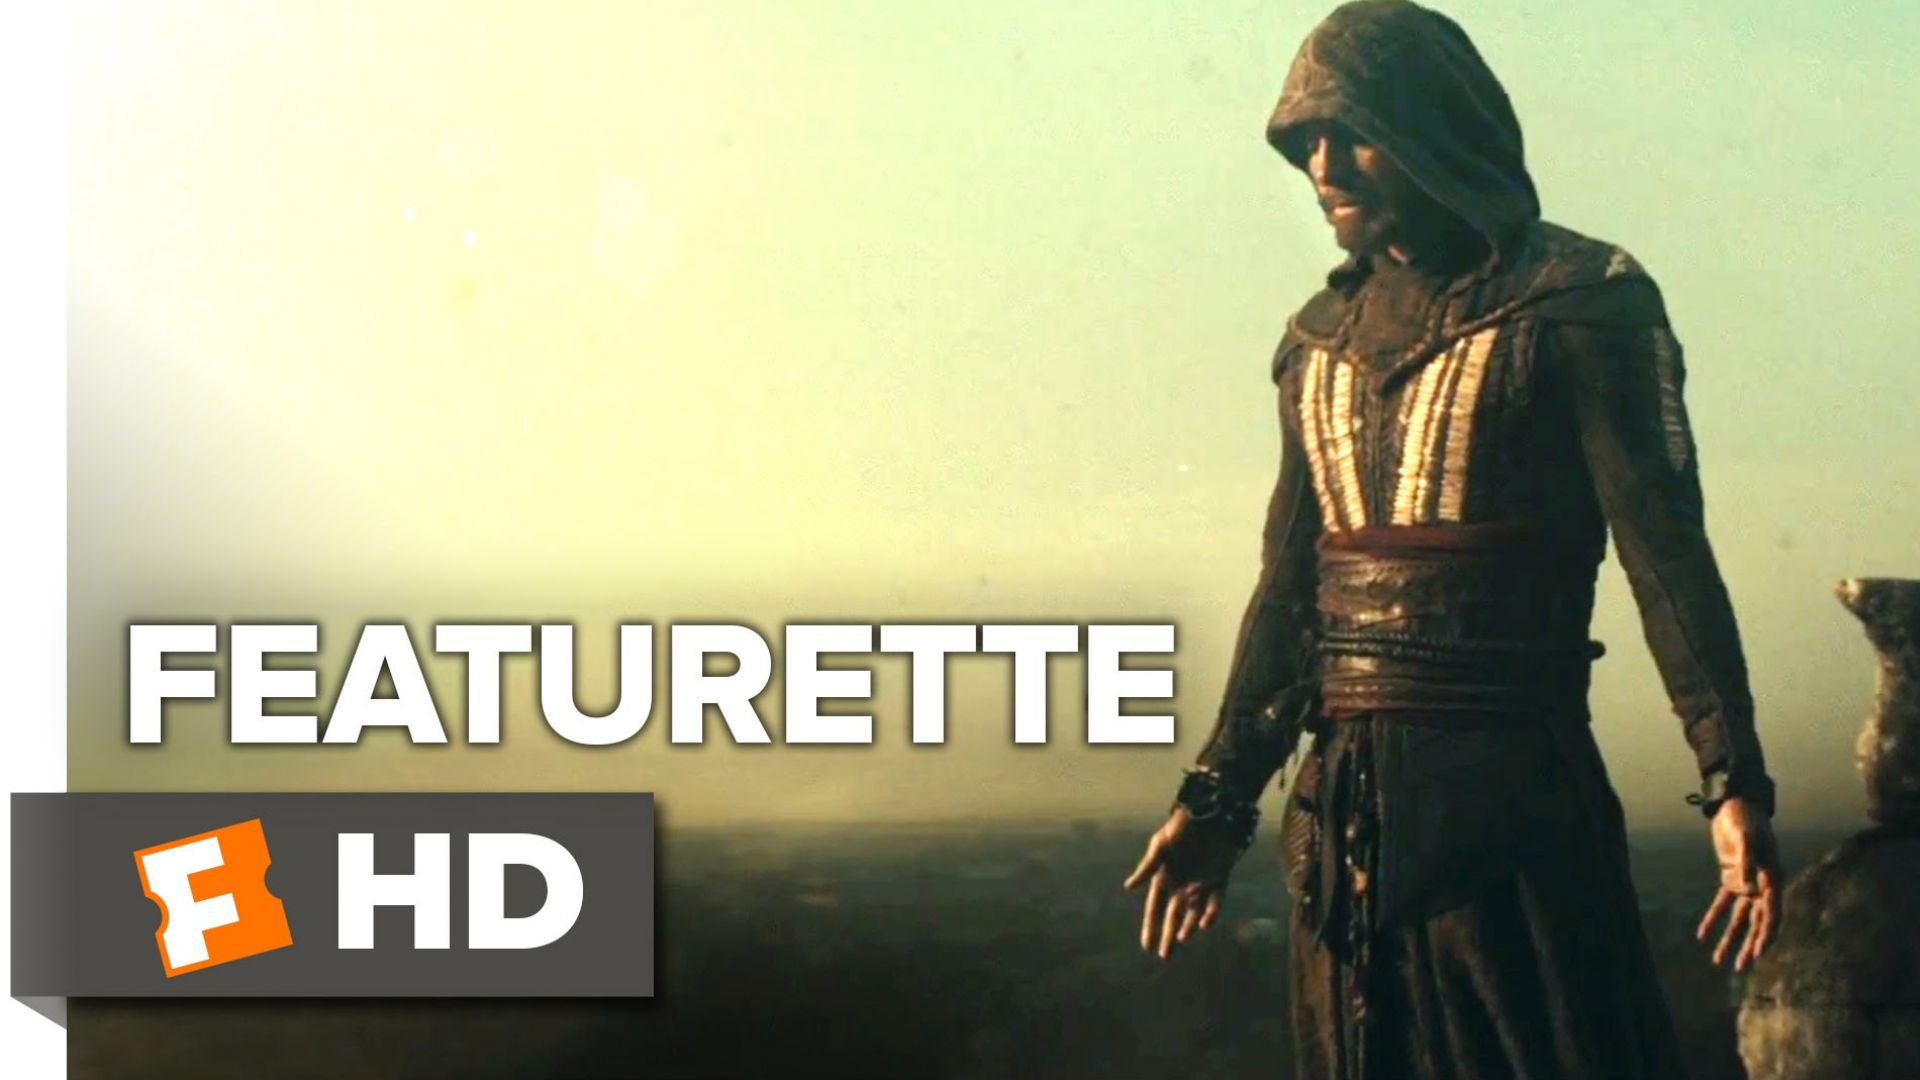 Take a leap of faith with the new featurette for Michael Fas